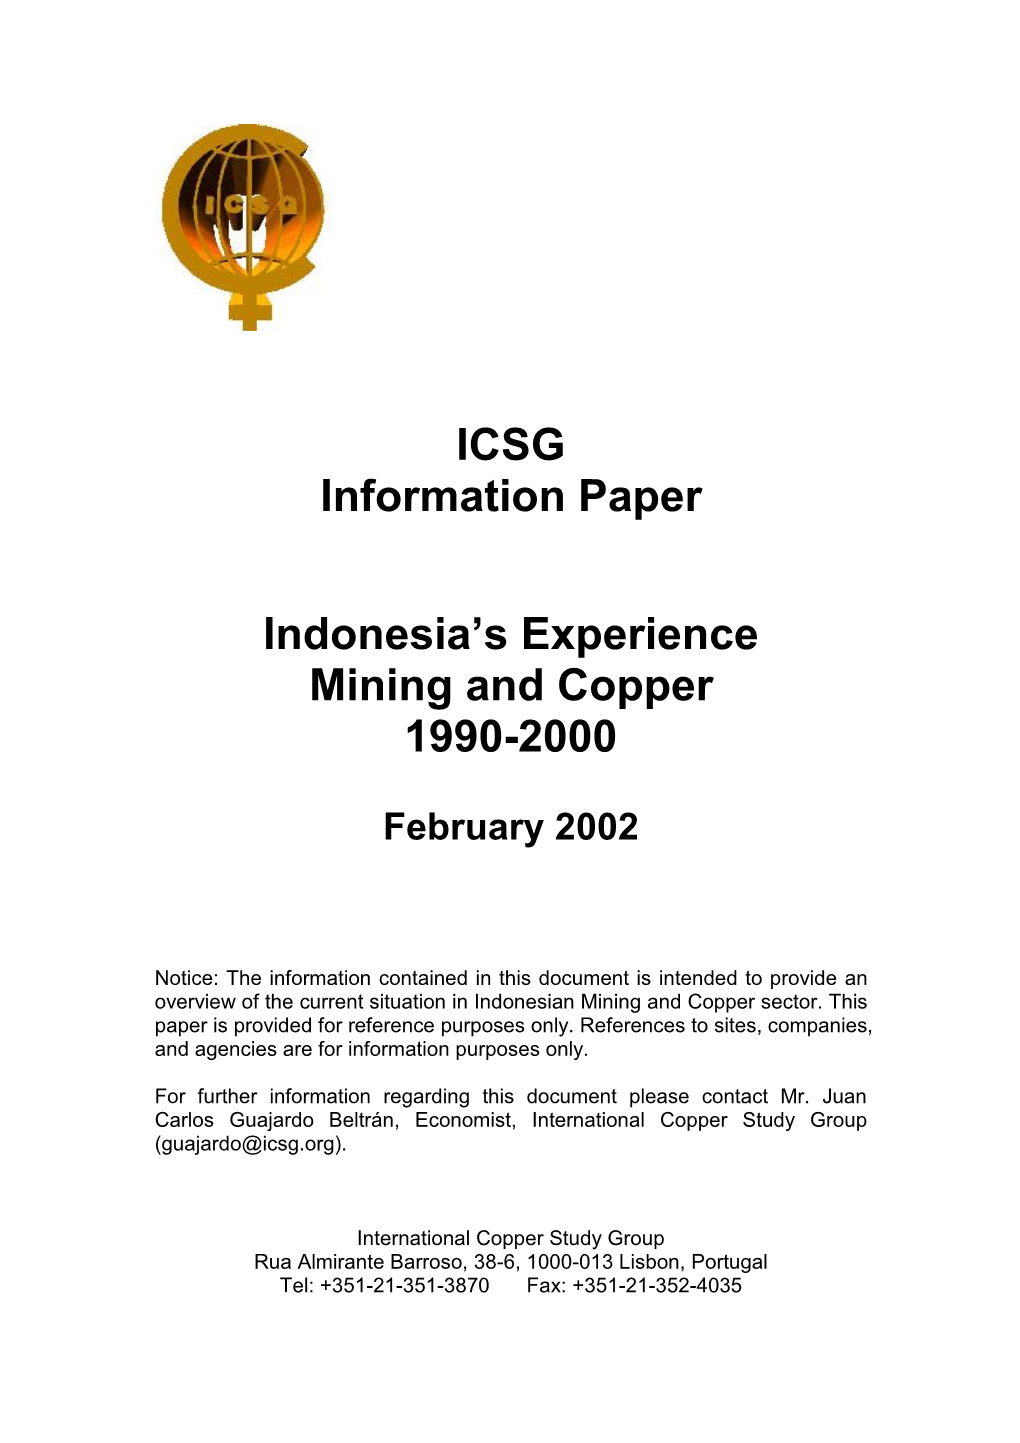 ICSG Information Paper Indonesia's Experience Mining and Copper